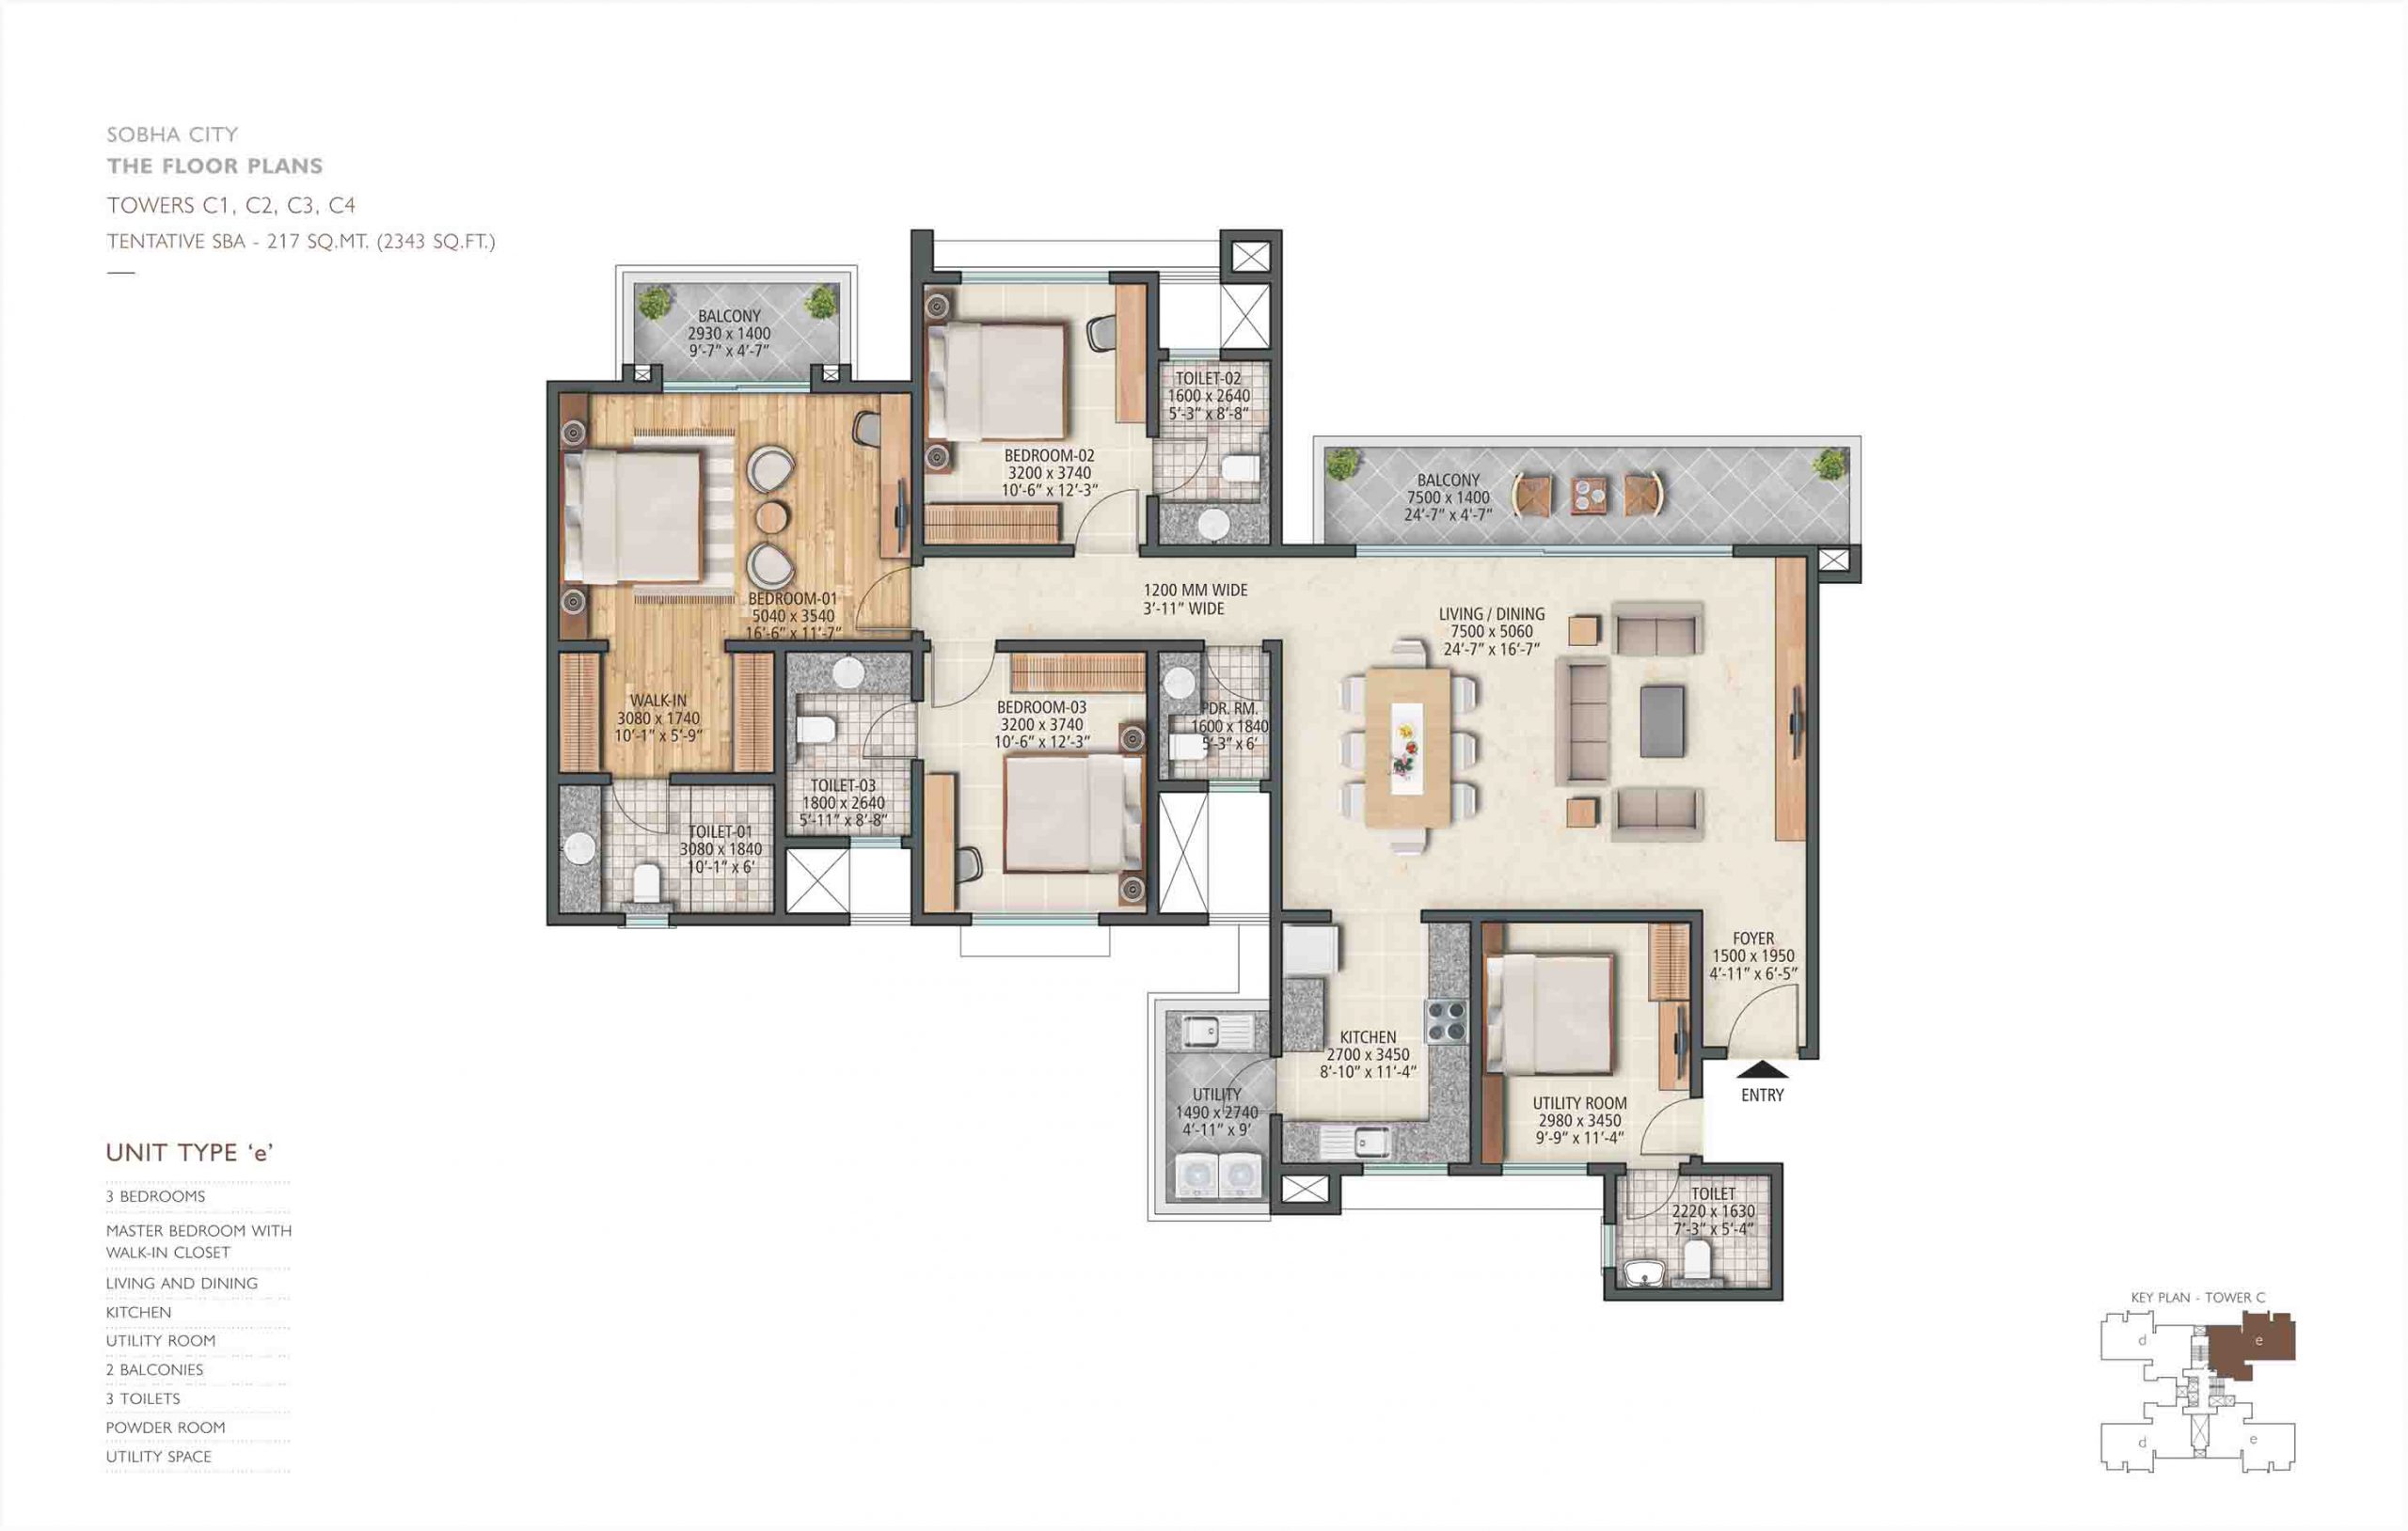 3BHK+Utility Space + Power Space-Type ‘e’- 217 sq. mt. (2343 sq. ft.)